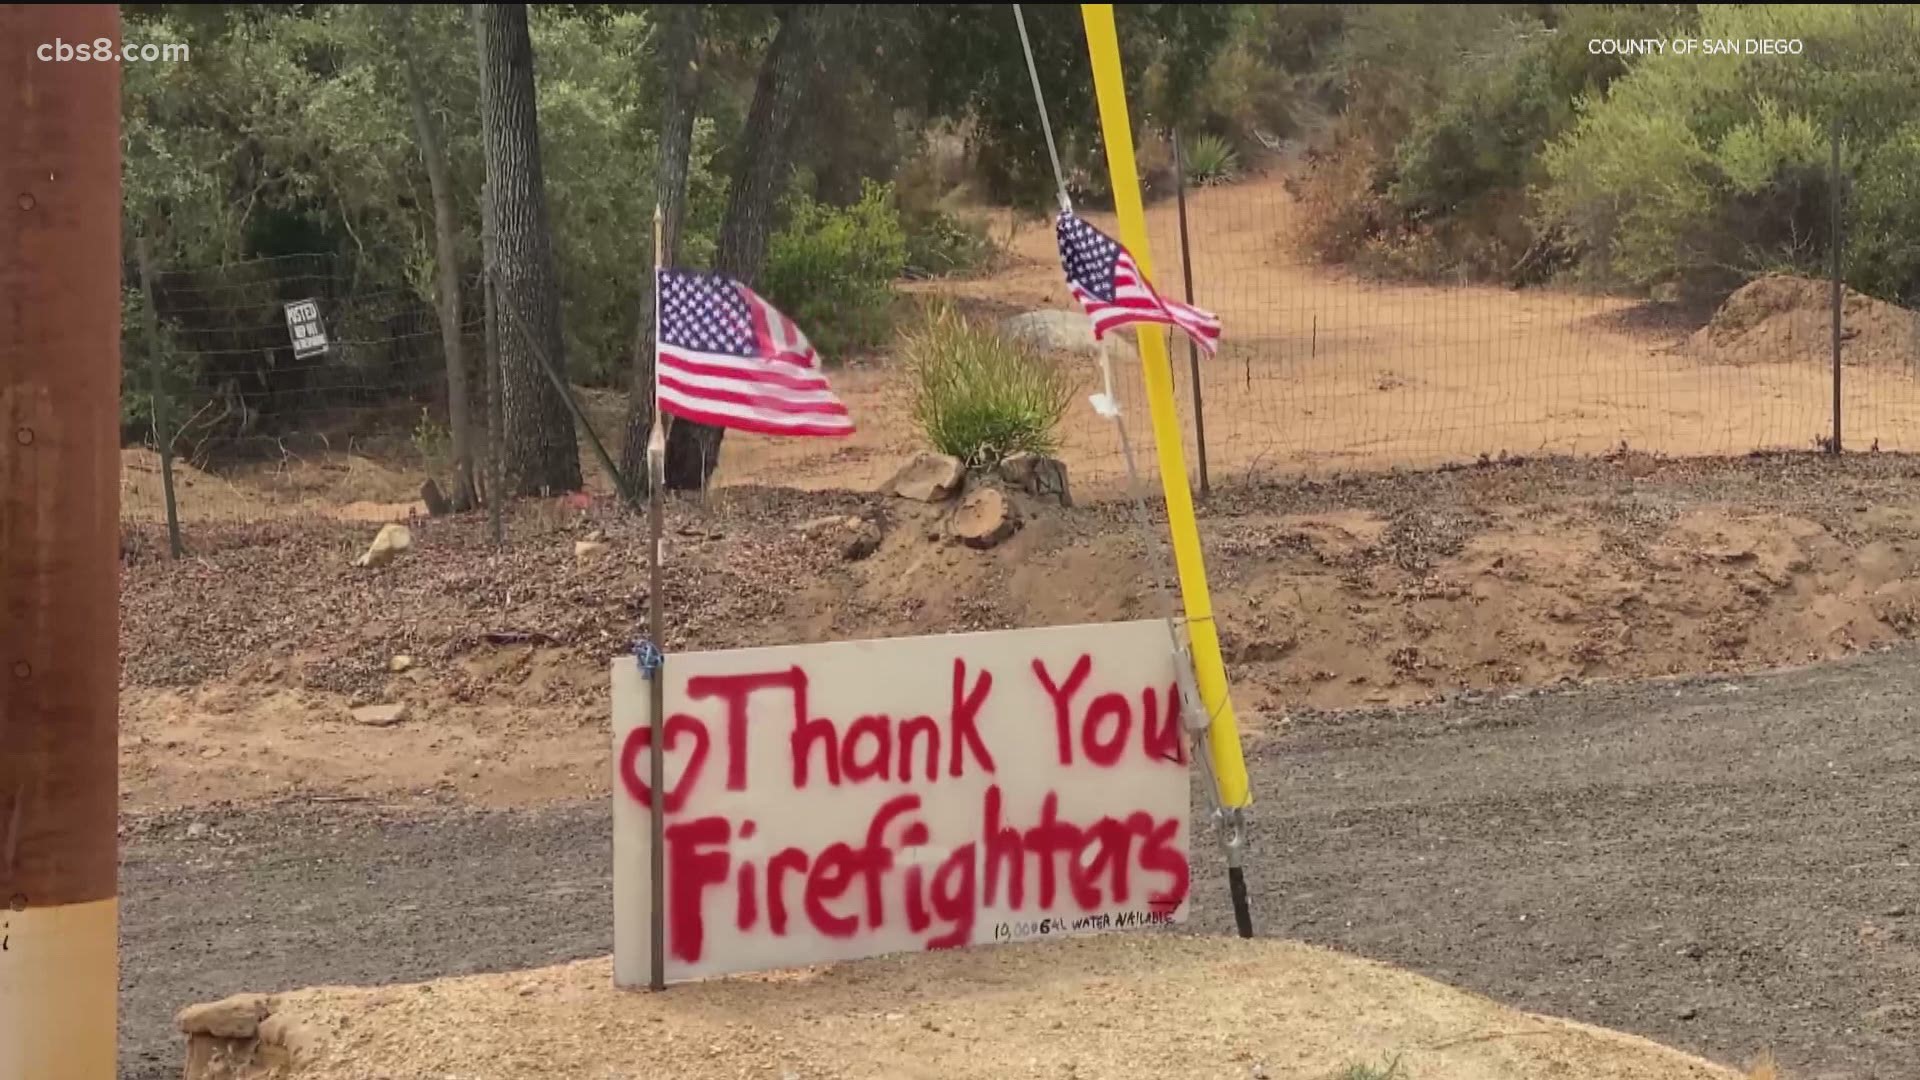 Officials are able to survey the damage on the 17,093 acres as firefighters continue to mop up hot spots, work towards complete containment.